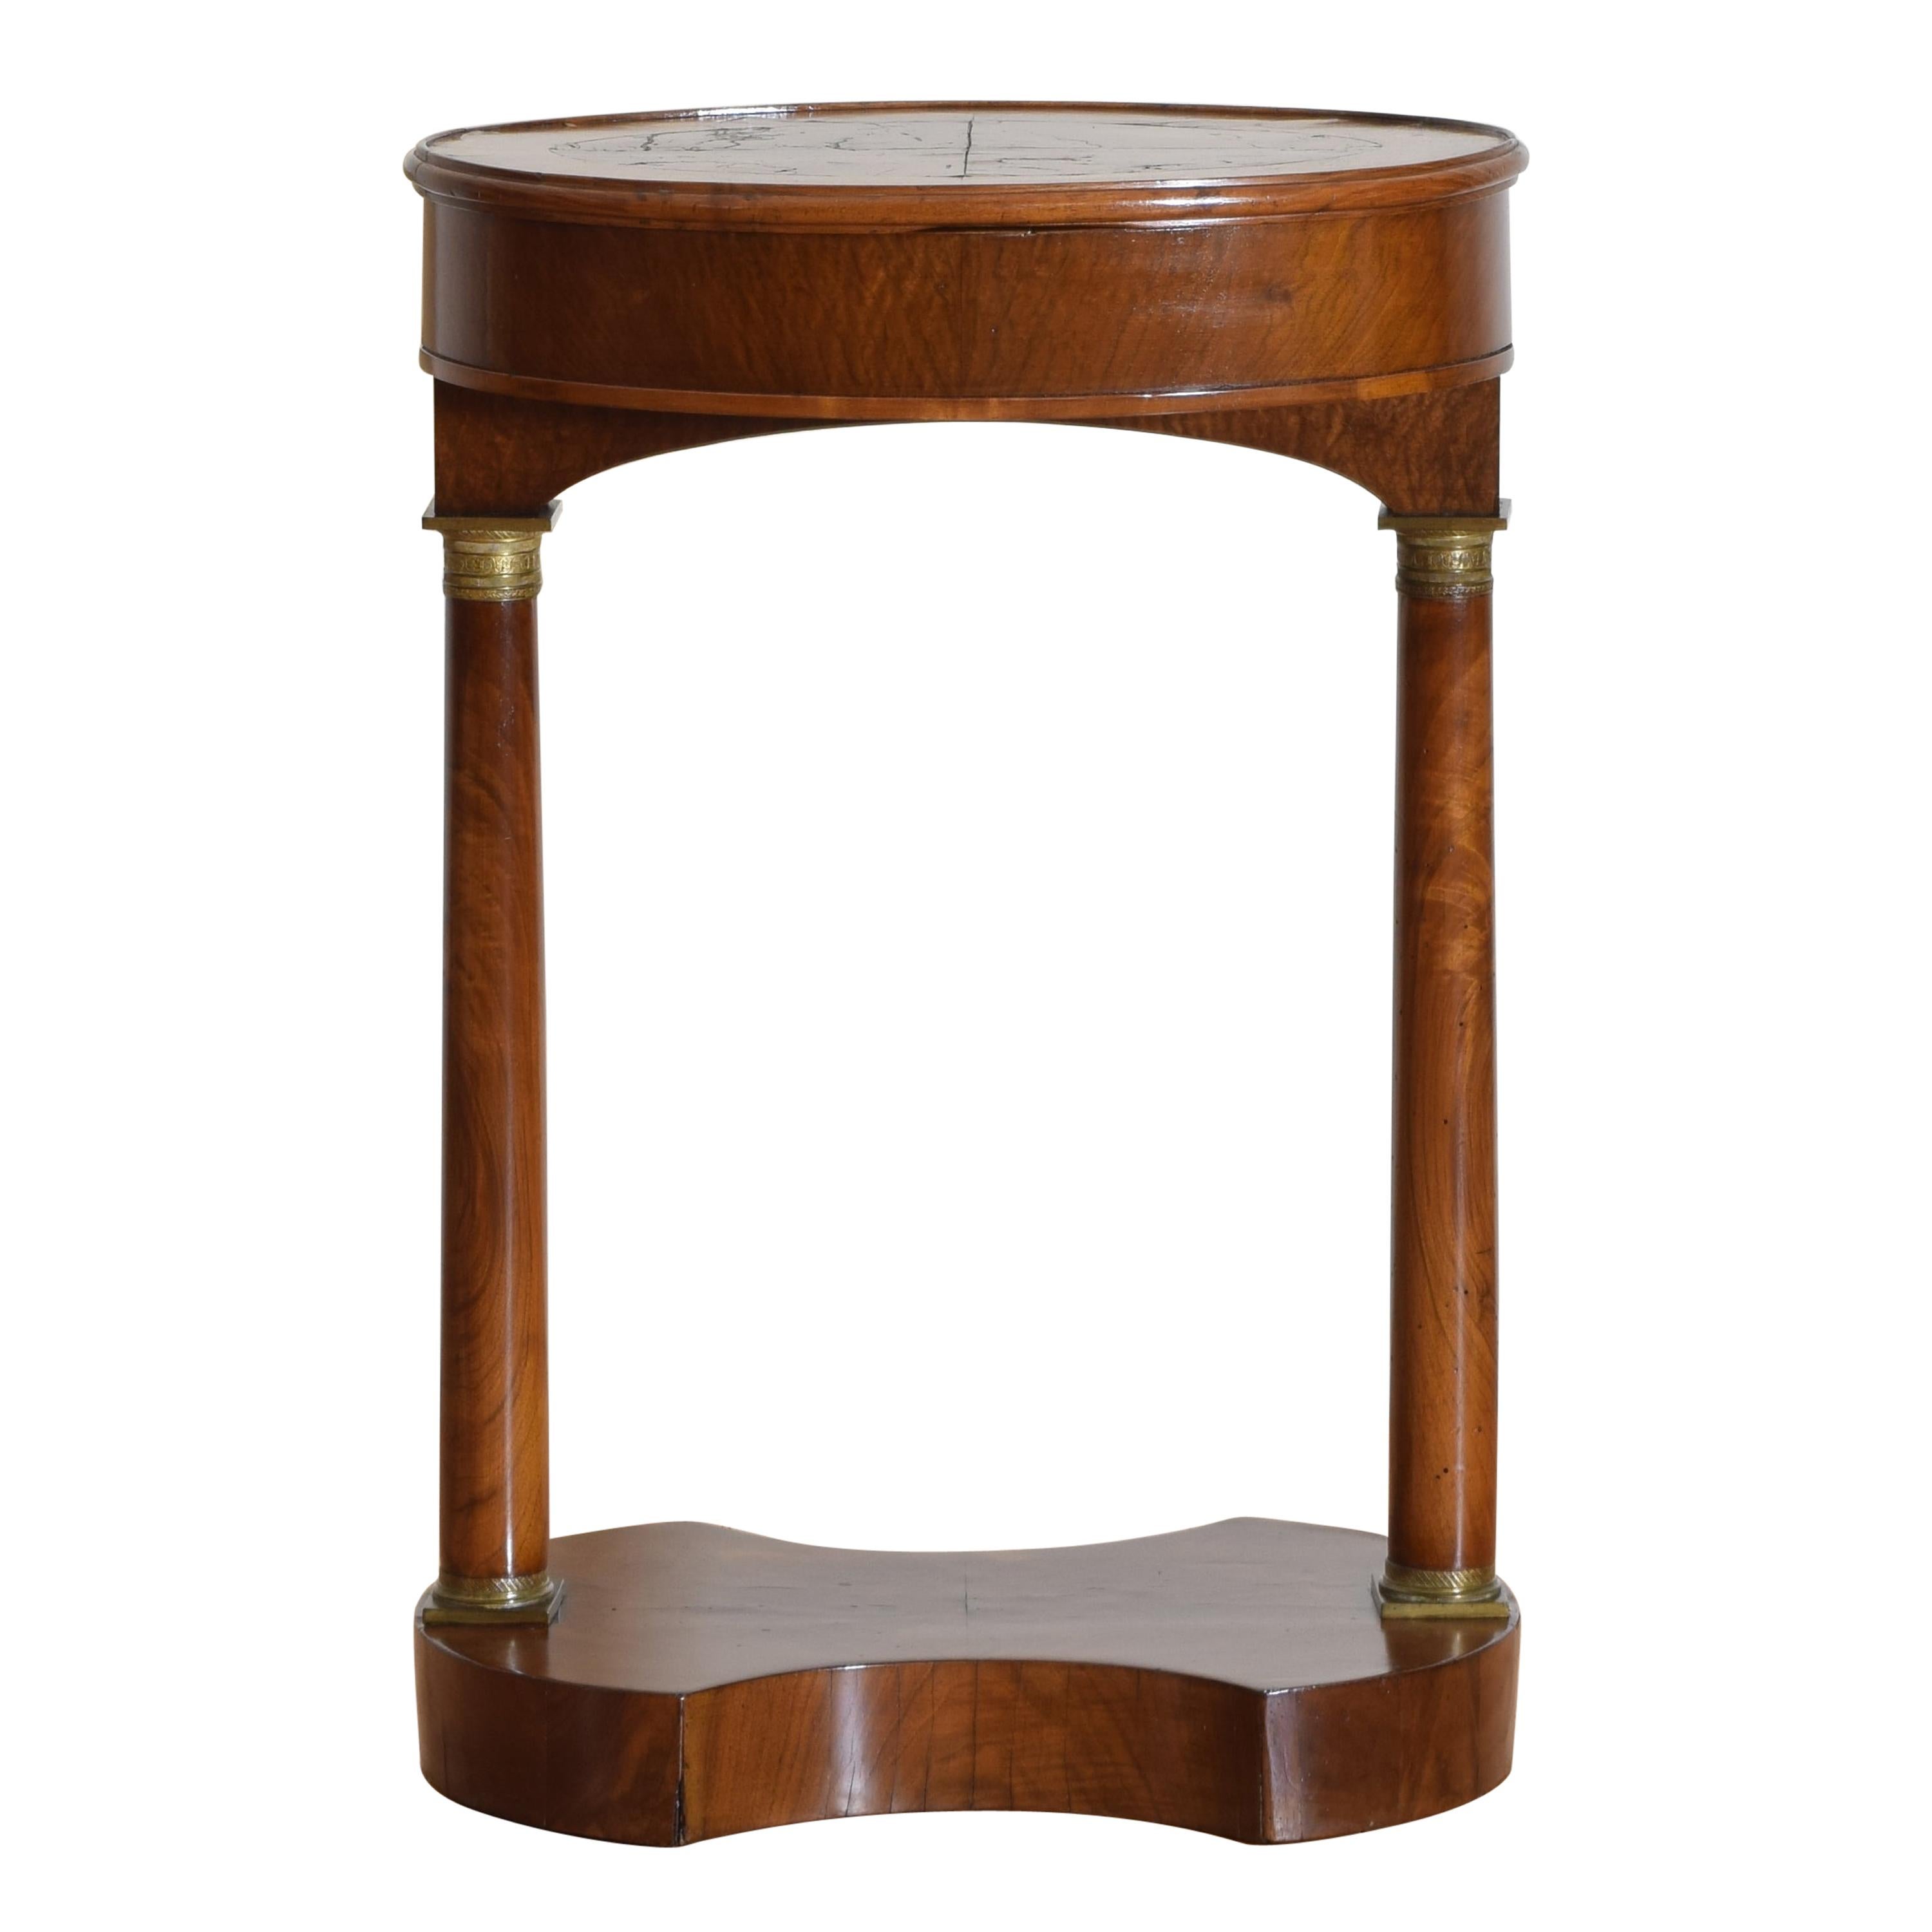 Italian Empire Style Walnut & Brass Mounted Flip-Top Occasional Table, ca. 1860